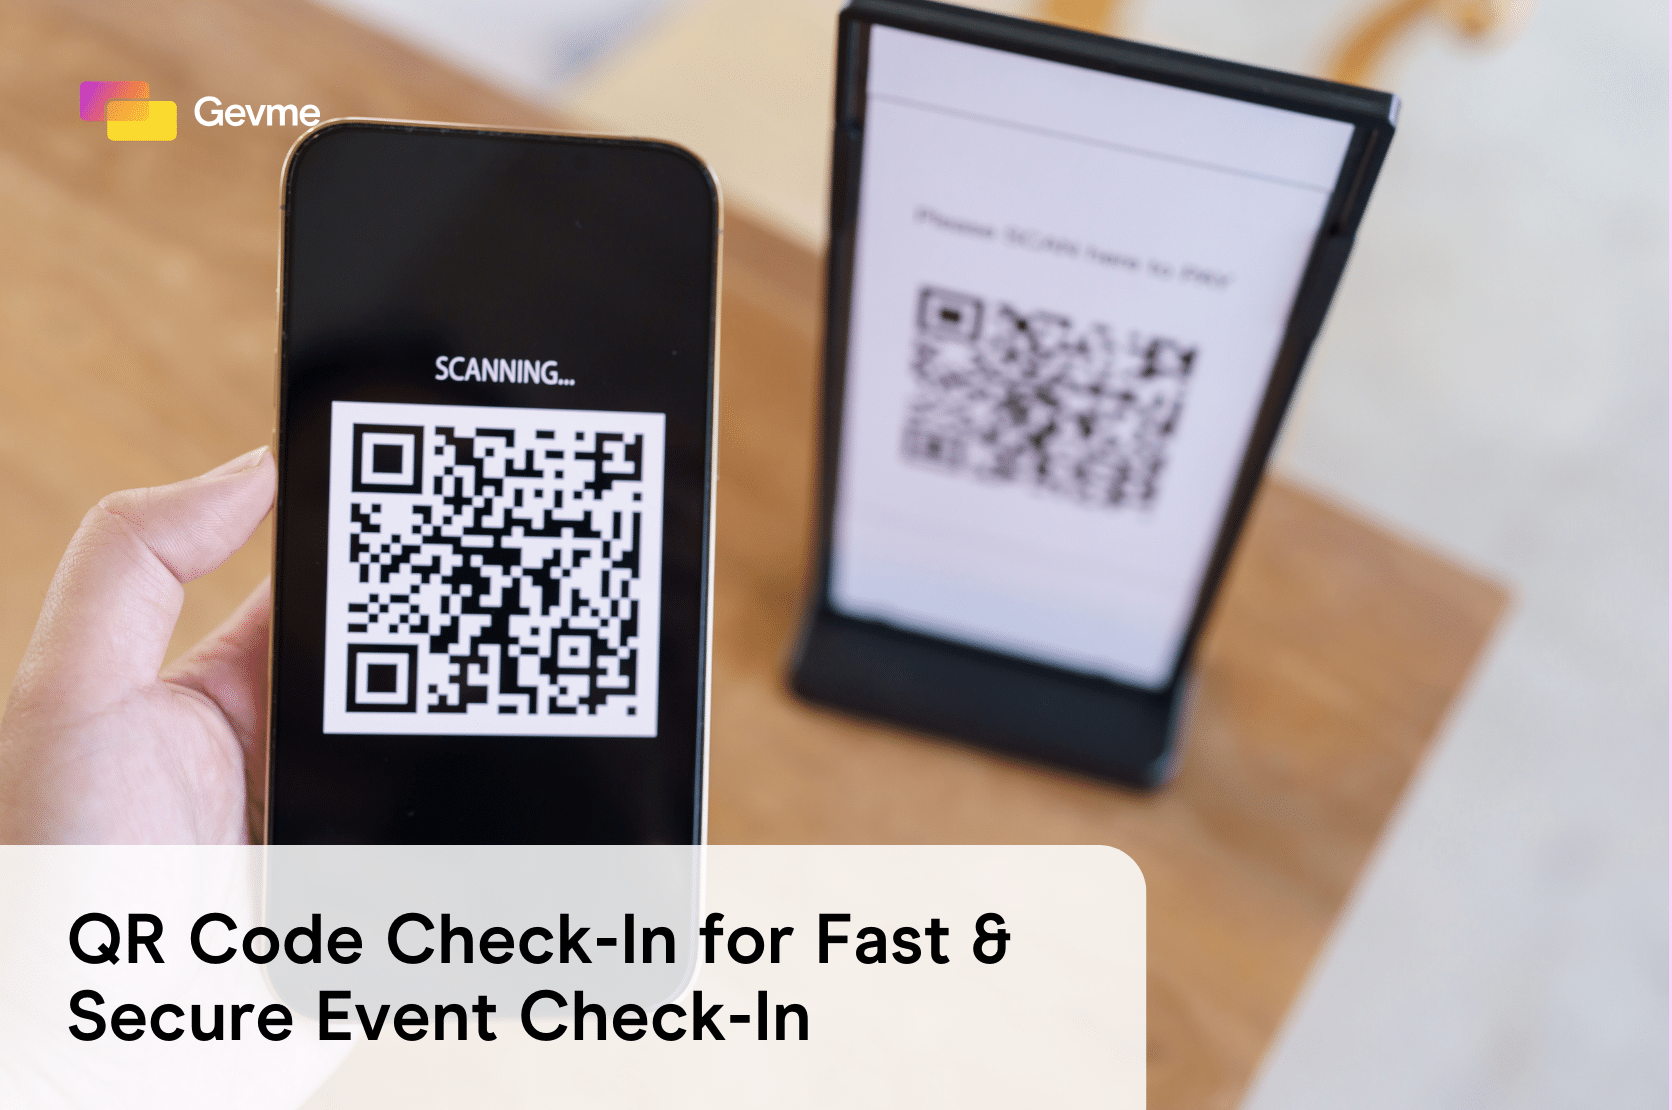 event check-in